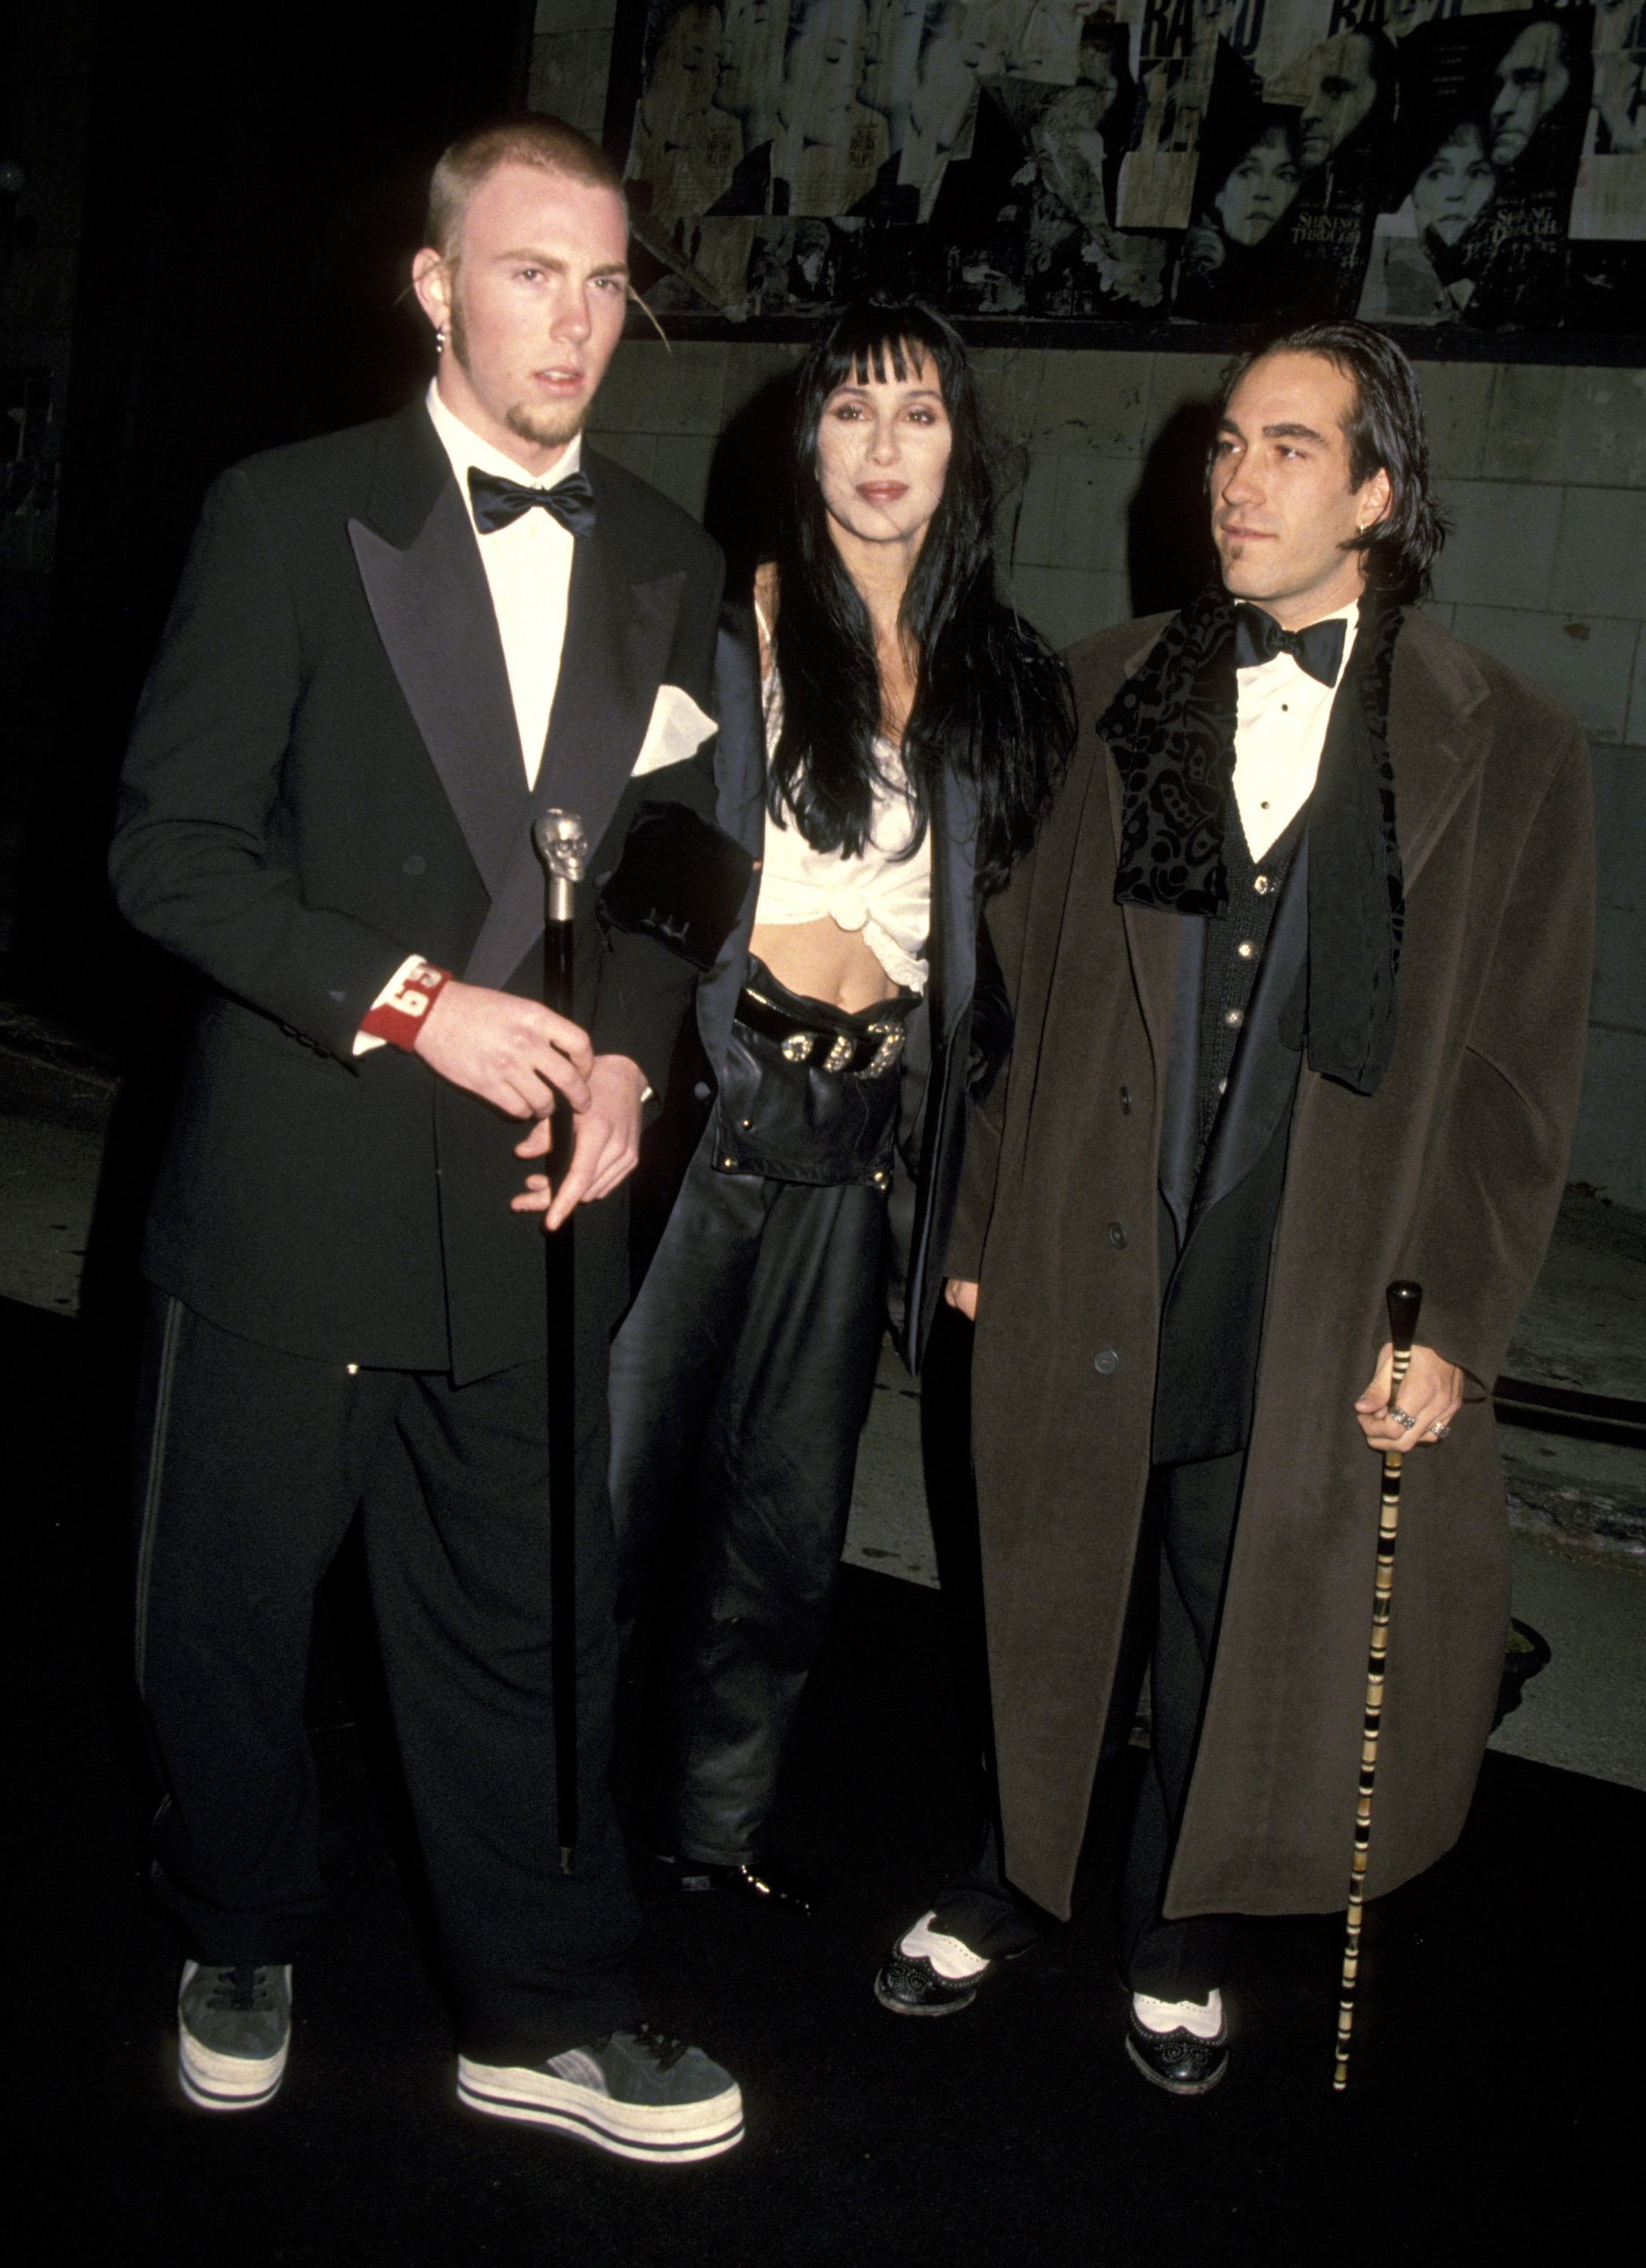 Elijah Blue Allman and Cher at the 5th Annual Fire and Ice Ball to Benefit Revlon UCLA Women Cancer Center in 1994 | Source: Getty Images